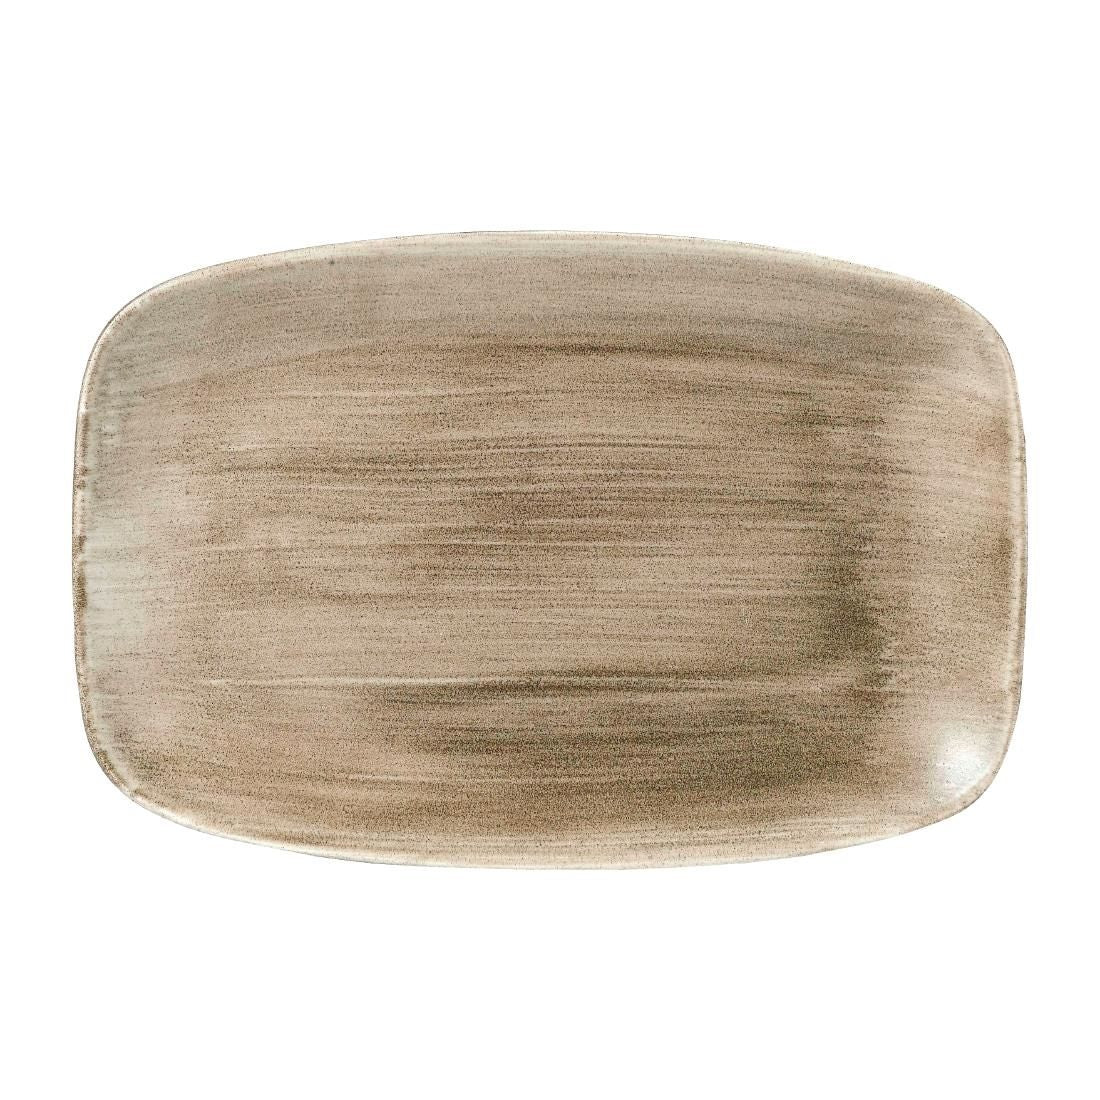 FD862 Churchill Stonecast Patina Oblong Plates Antique Taupe 305x198mm (Pack of 6) JD Catering Equipment Solutions Ltd